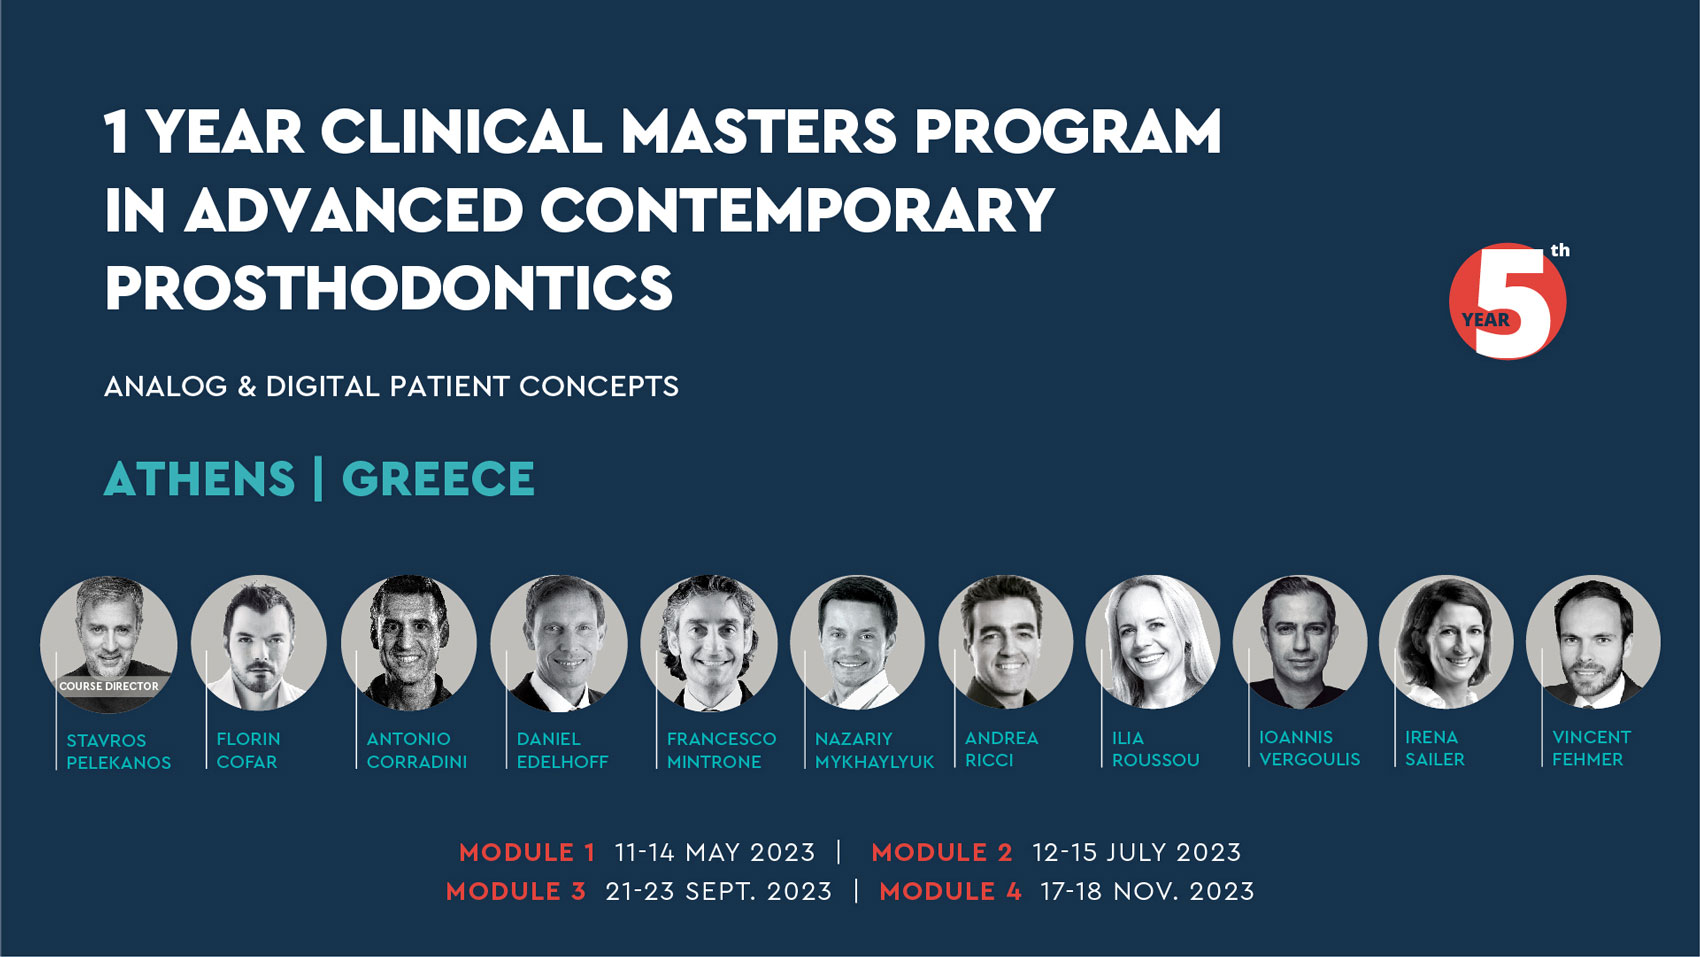 1 Year Clinical Masters Program in Advanced Contemporary Prosthodontics